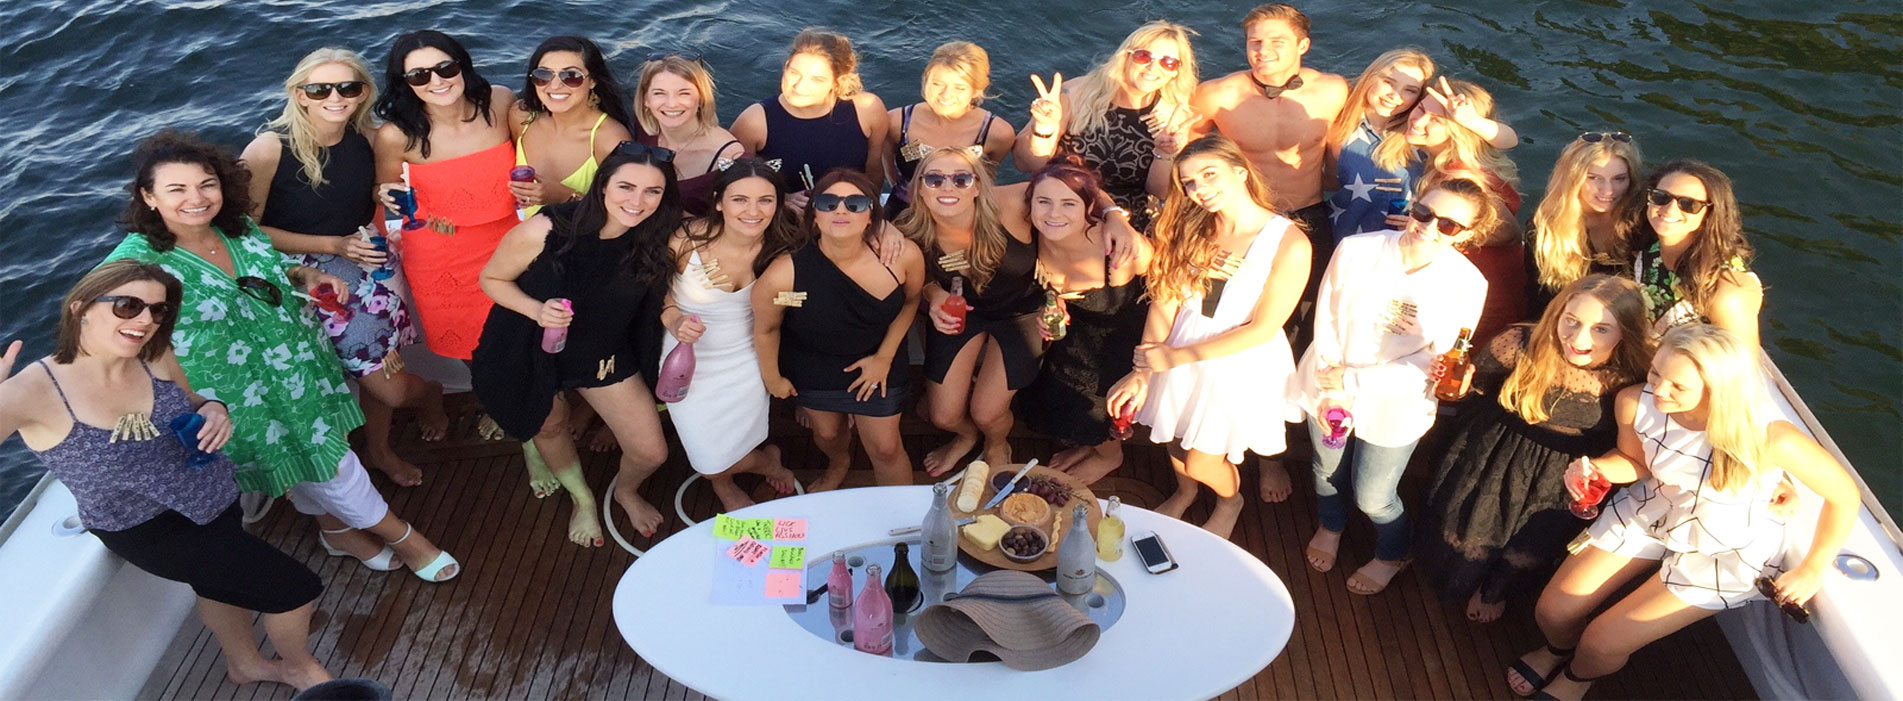 JUDE-boat-hire-perth-hens-party-back-deck